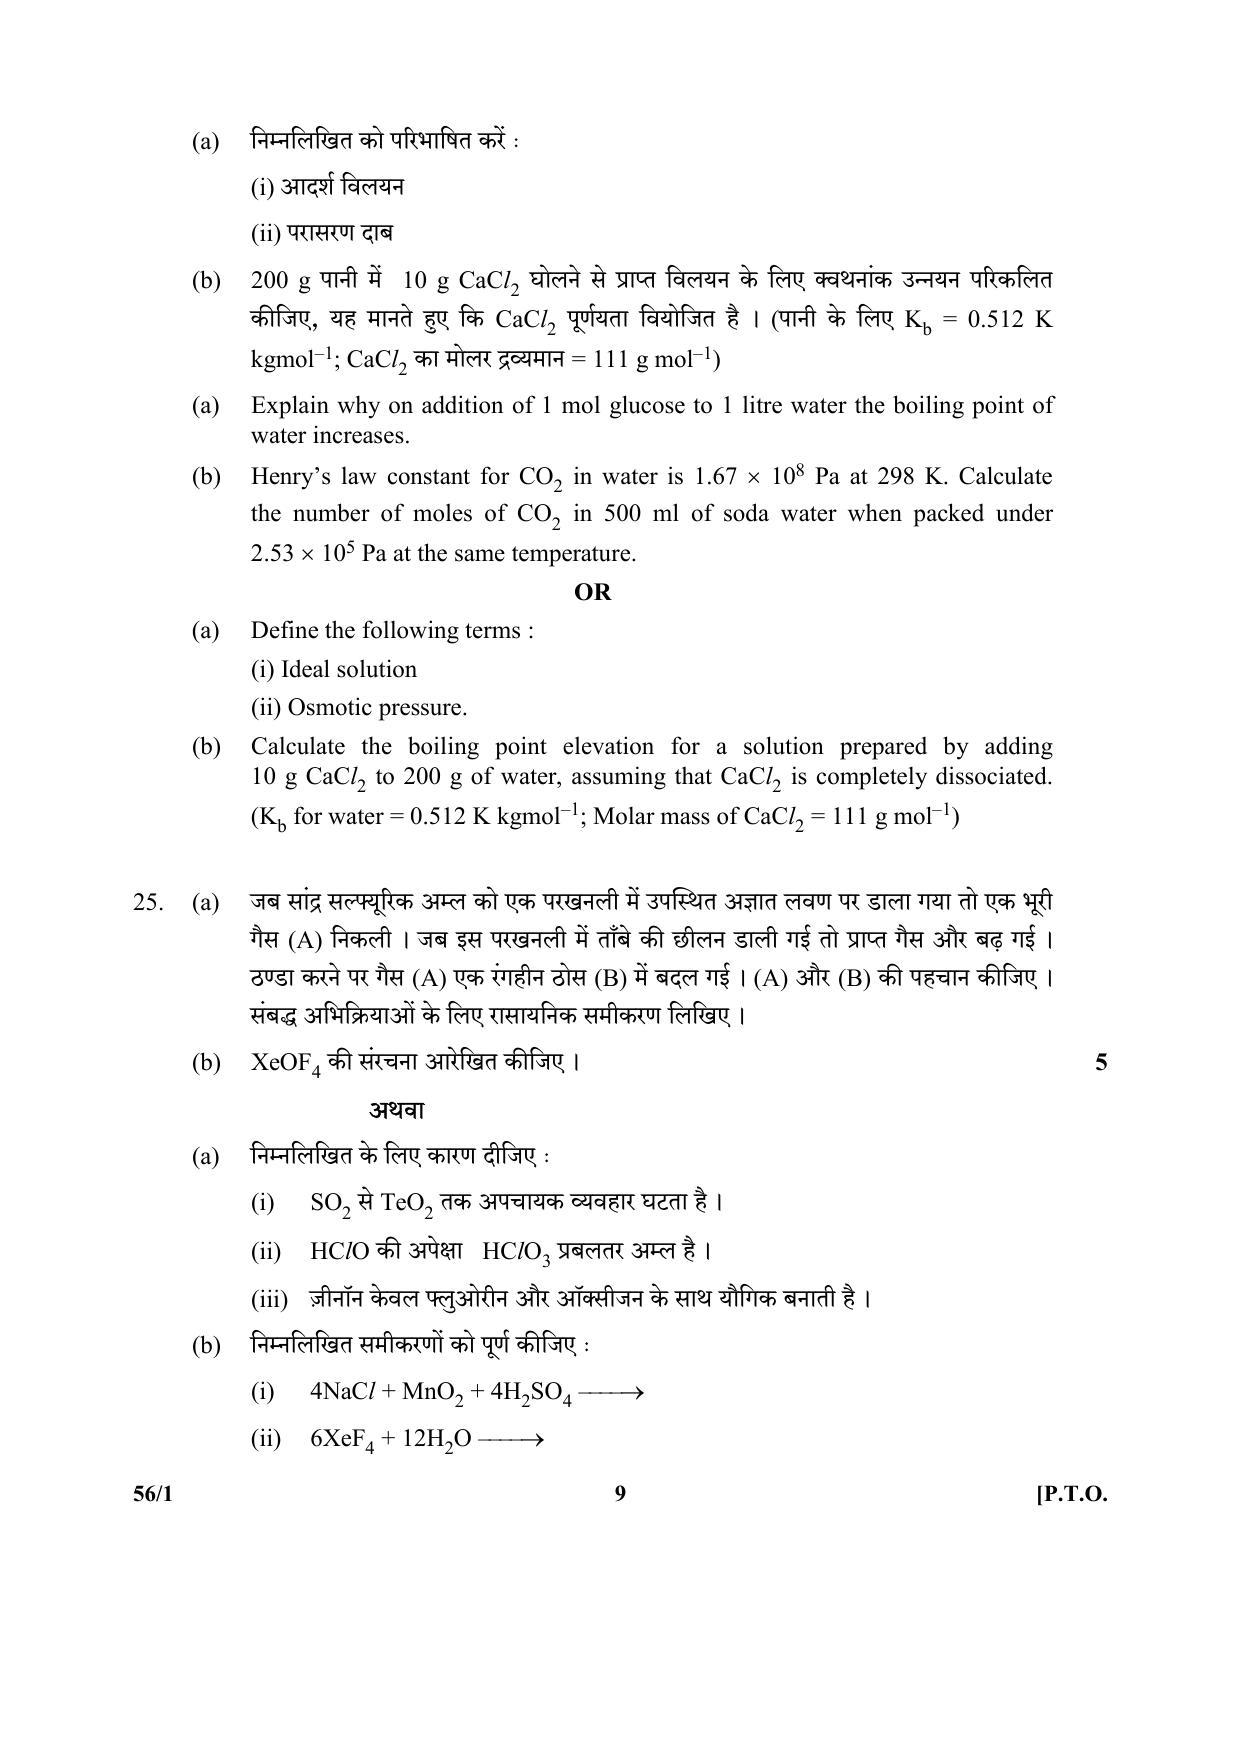 CBSE Class 12 56-1- (Chemistry) 2017-comptt Question Paper - Page 9